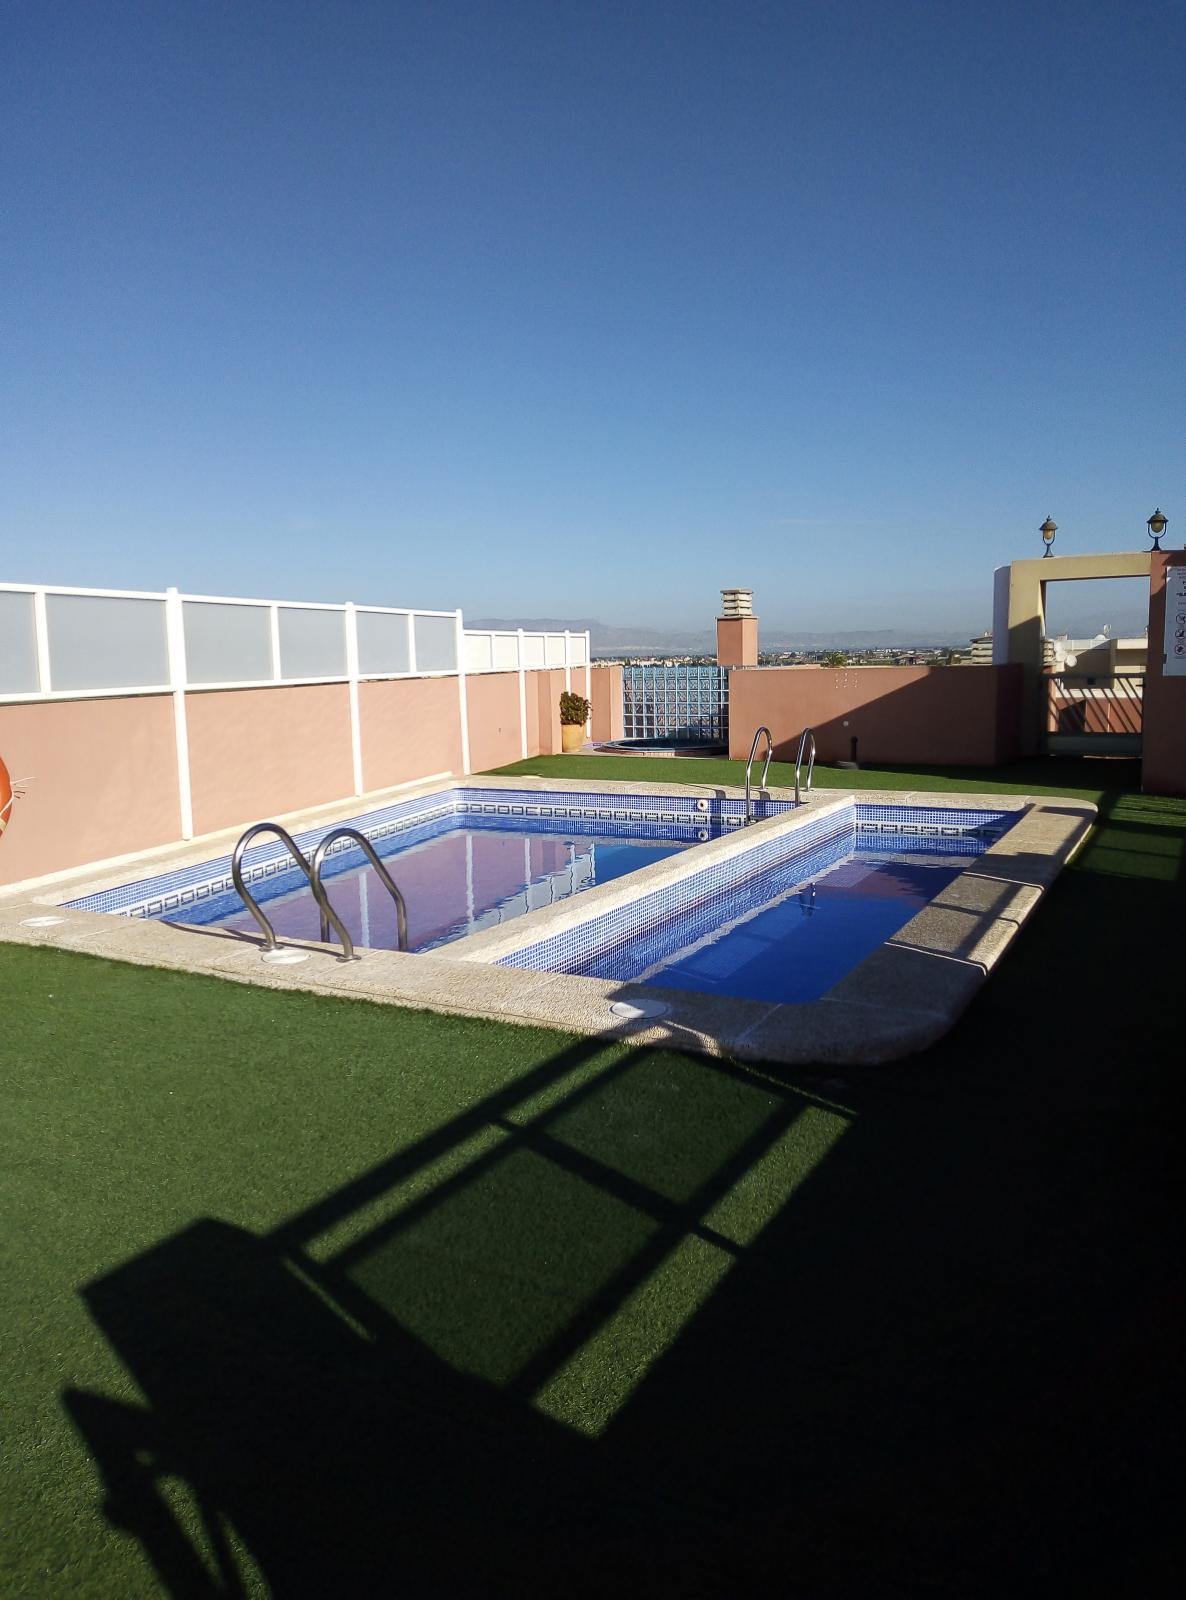 FULLY FURNISHED Apartment! It has a swimming pool, large solarium and communal terraces